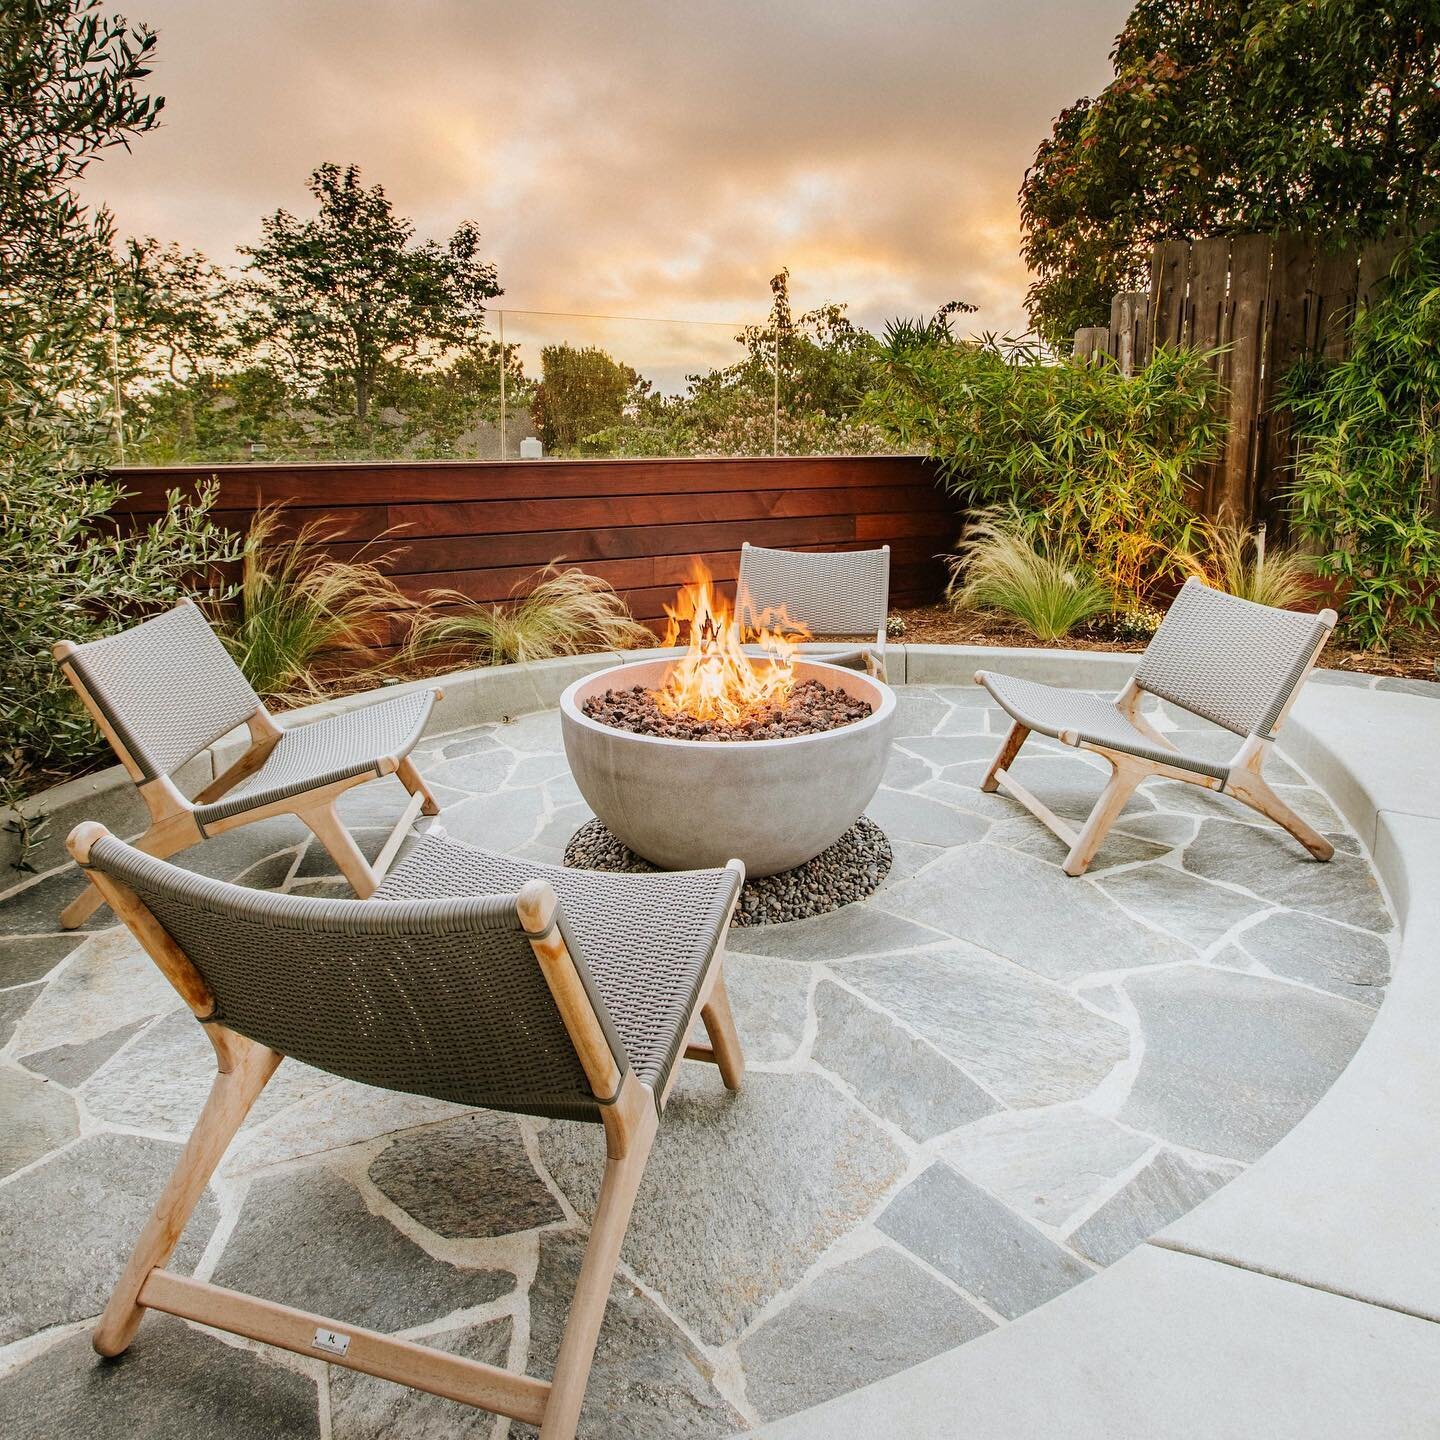 Curves are hard. Whenever we add curves into our mostly linear designs we do very specifically so the curve itself becomes the focal point vs.  random free flow design. Which means all the curves have to be precise, and throw a firepit in the center,